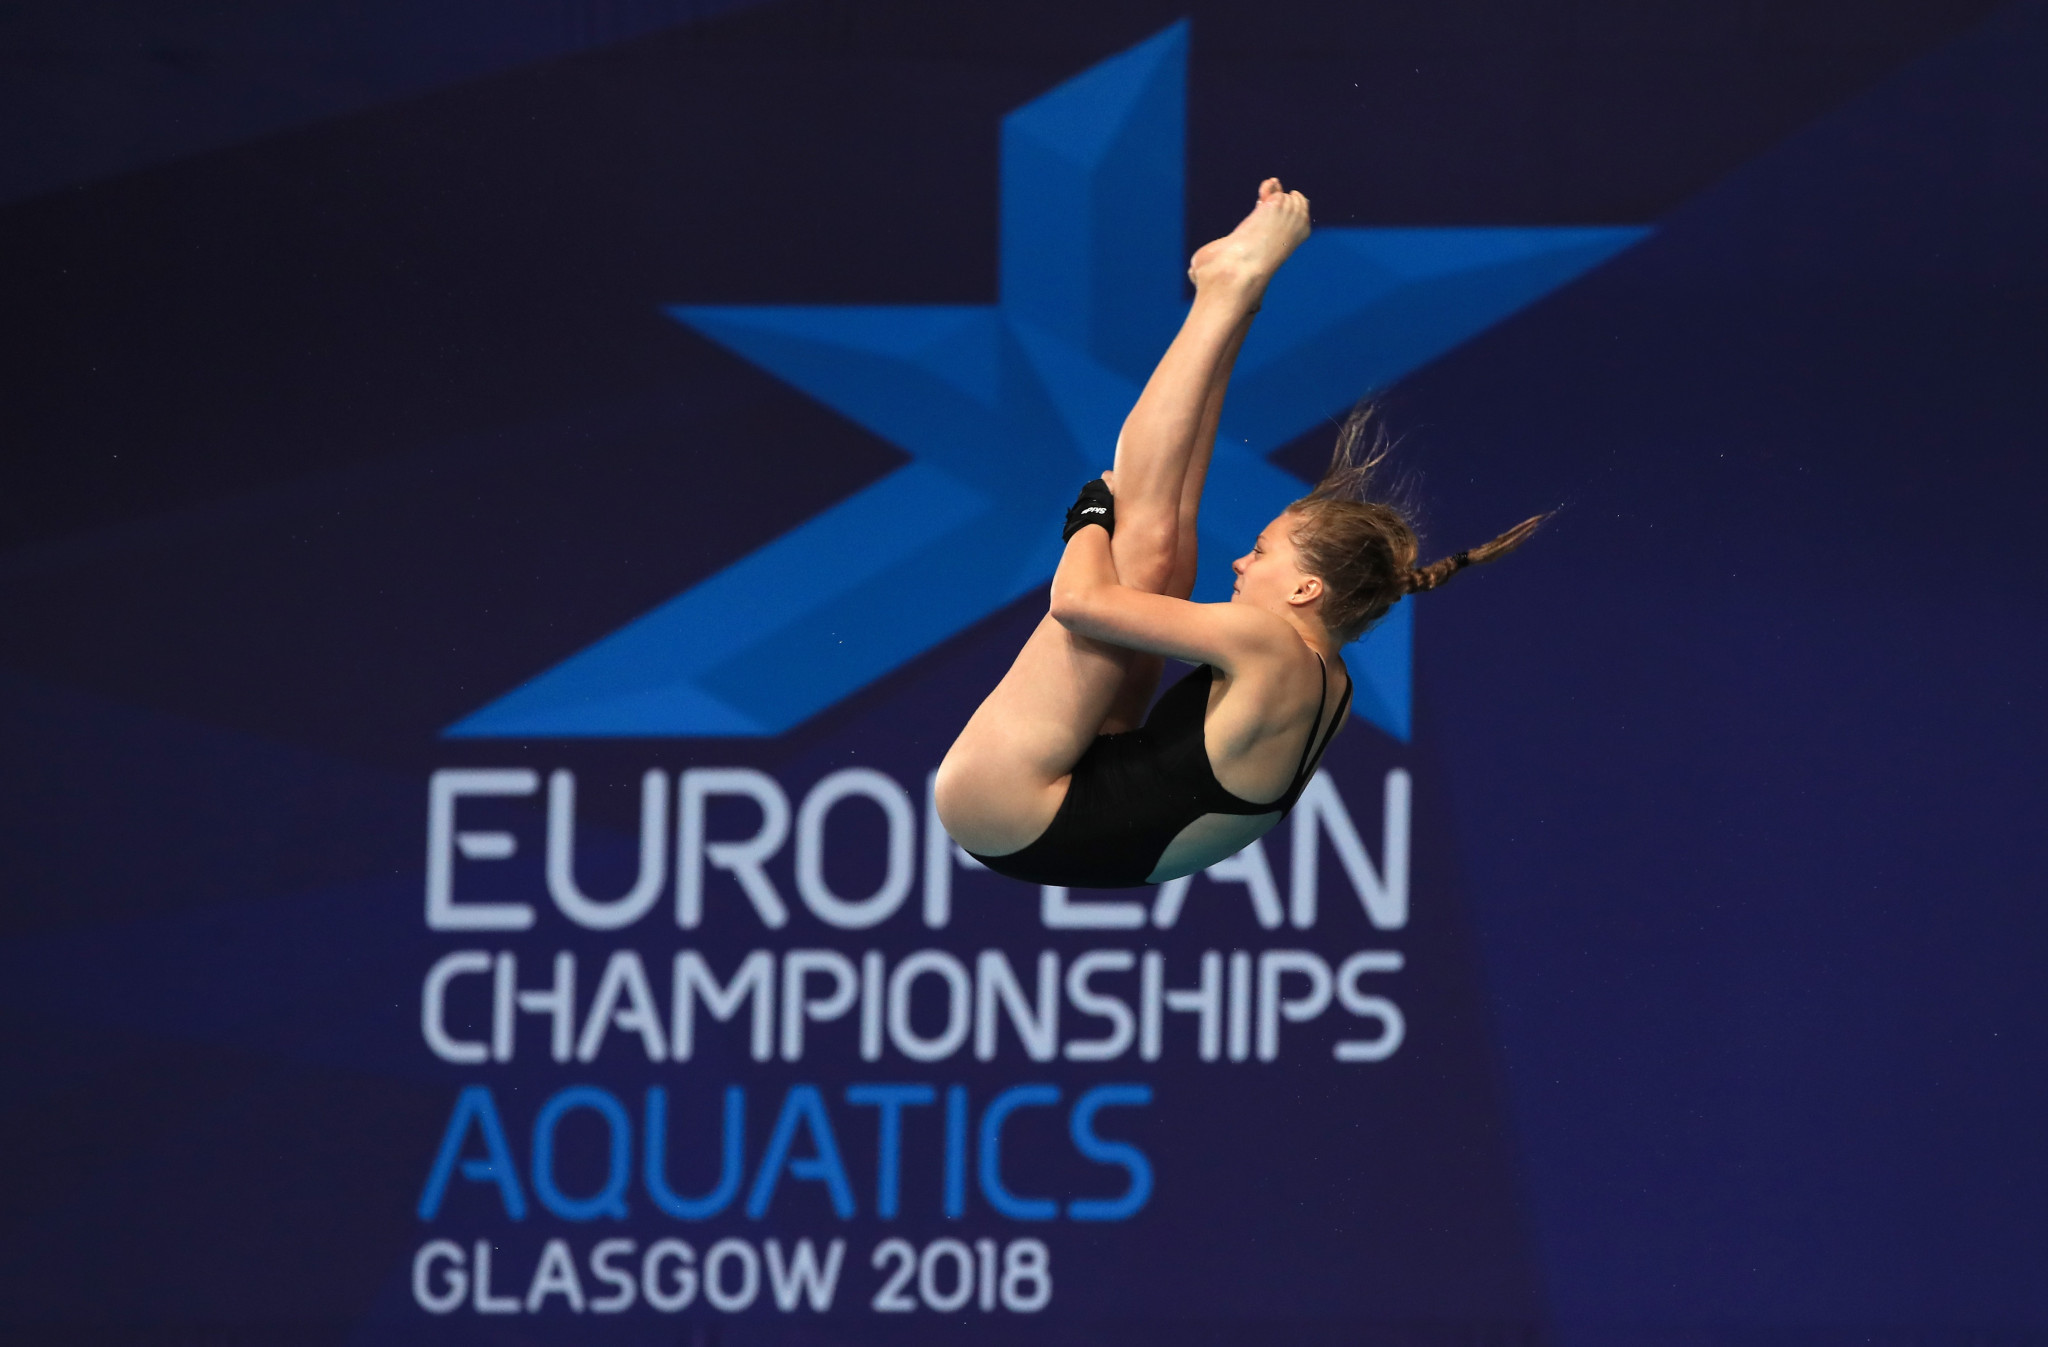 Ukraine's Sofiia Lyskun, pictured, and Oleg Kolodiy claimed the first diving gold medal of Glasgow 2018, which came in the mixed team event ©Getty Images